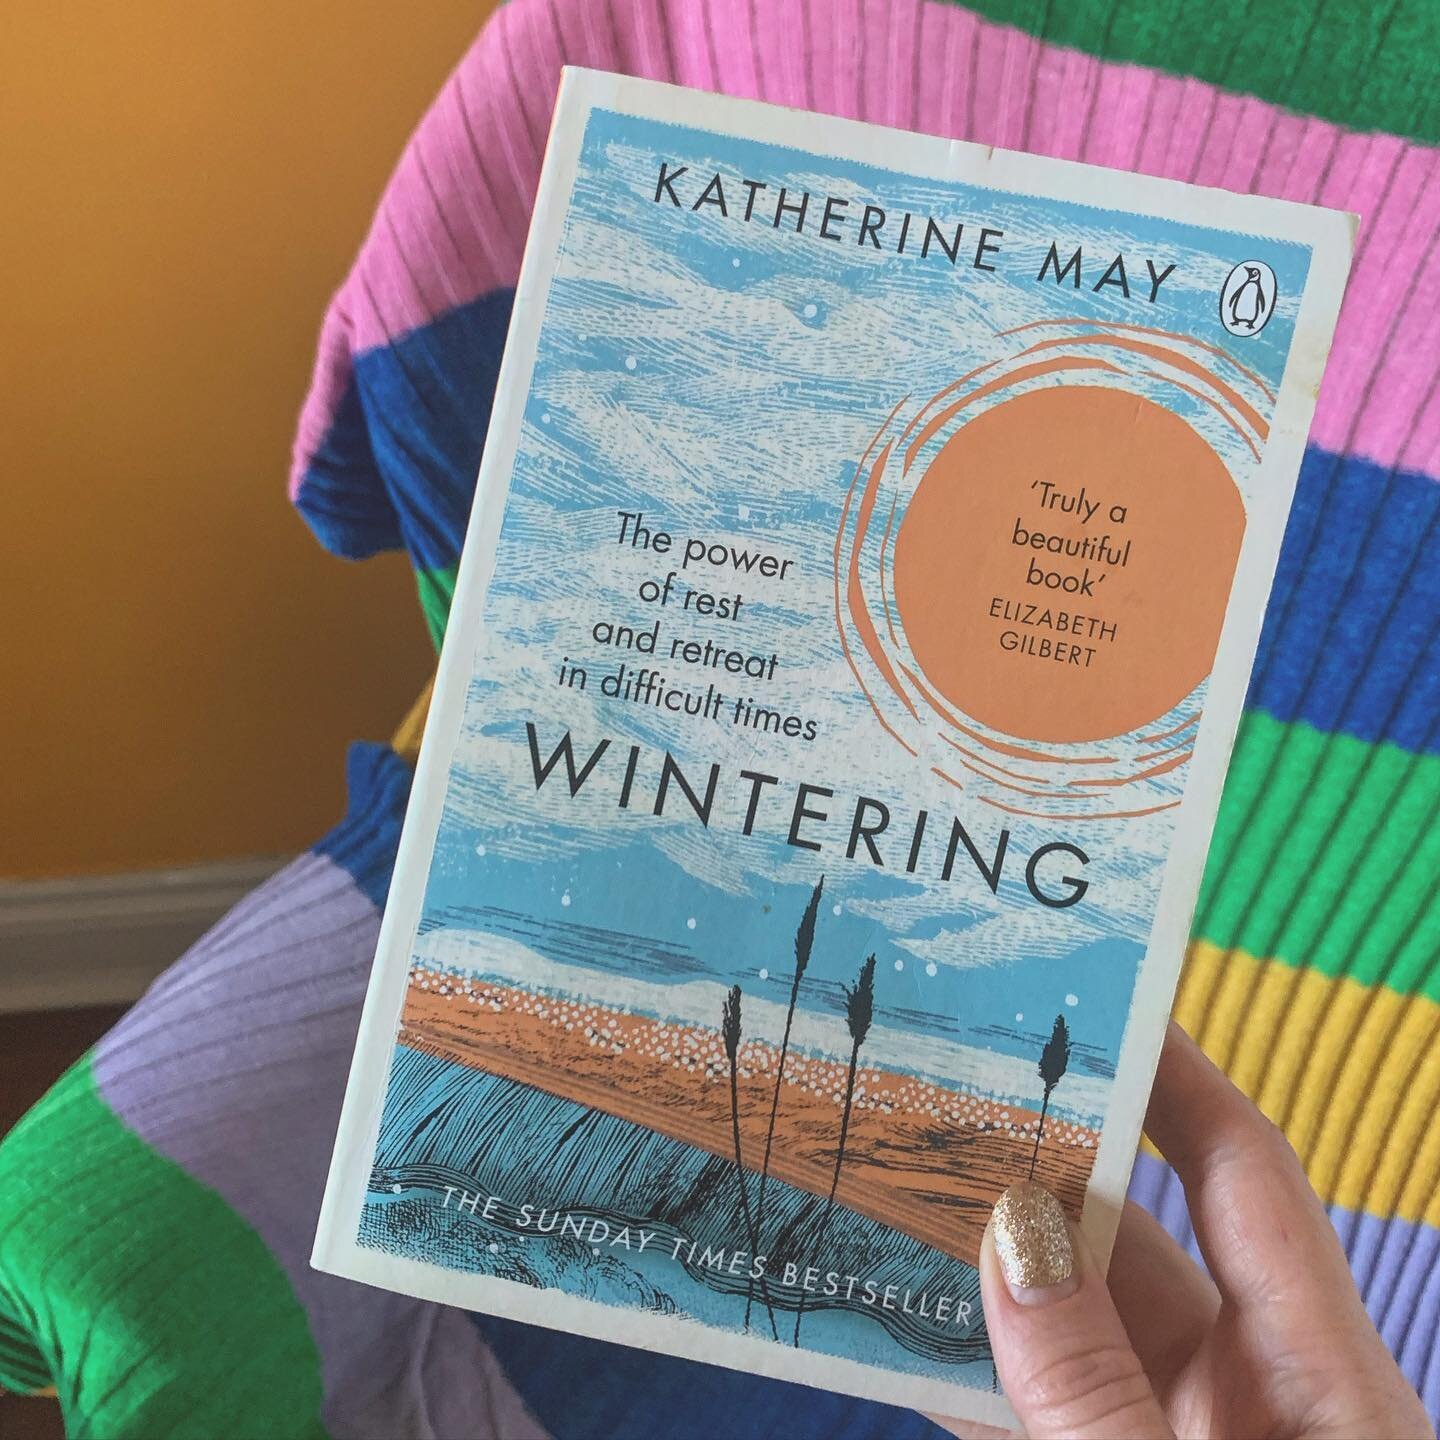 I finished this book right before it started snowing in London yesterday. n-Ice timing ❄️

Some themes I&rsquo;m holding:

☁️ our perspective towards our suffering is key. Can we see difficult feelings as a calling to listen to what we need and what&